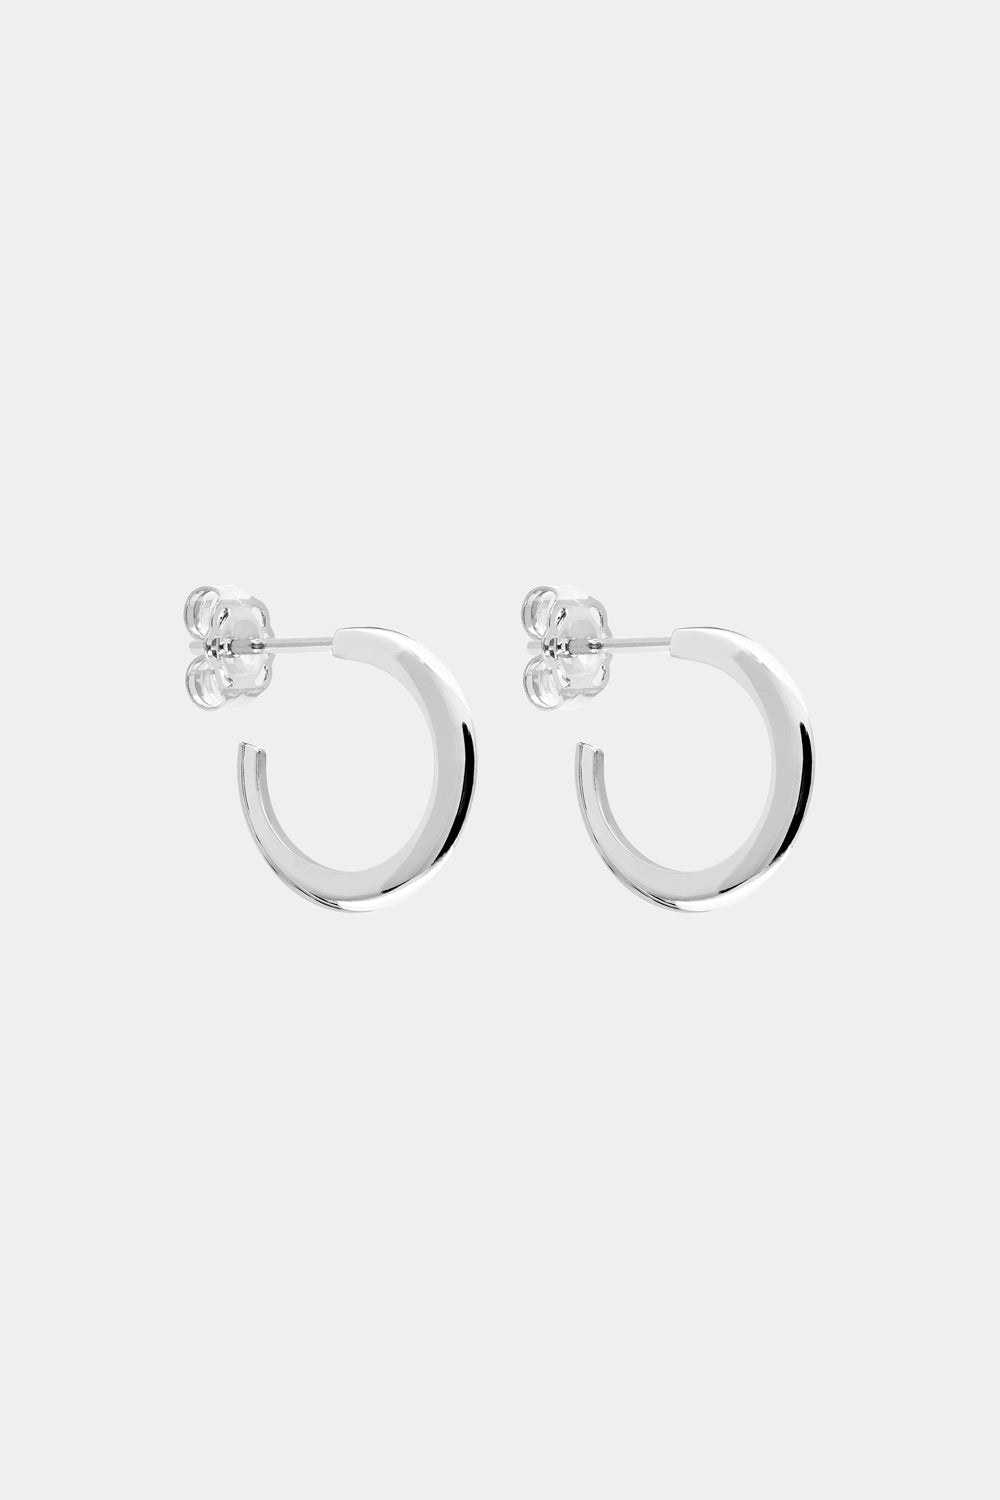 Mini Single Band Hoops | Silver or 9K White Gold